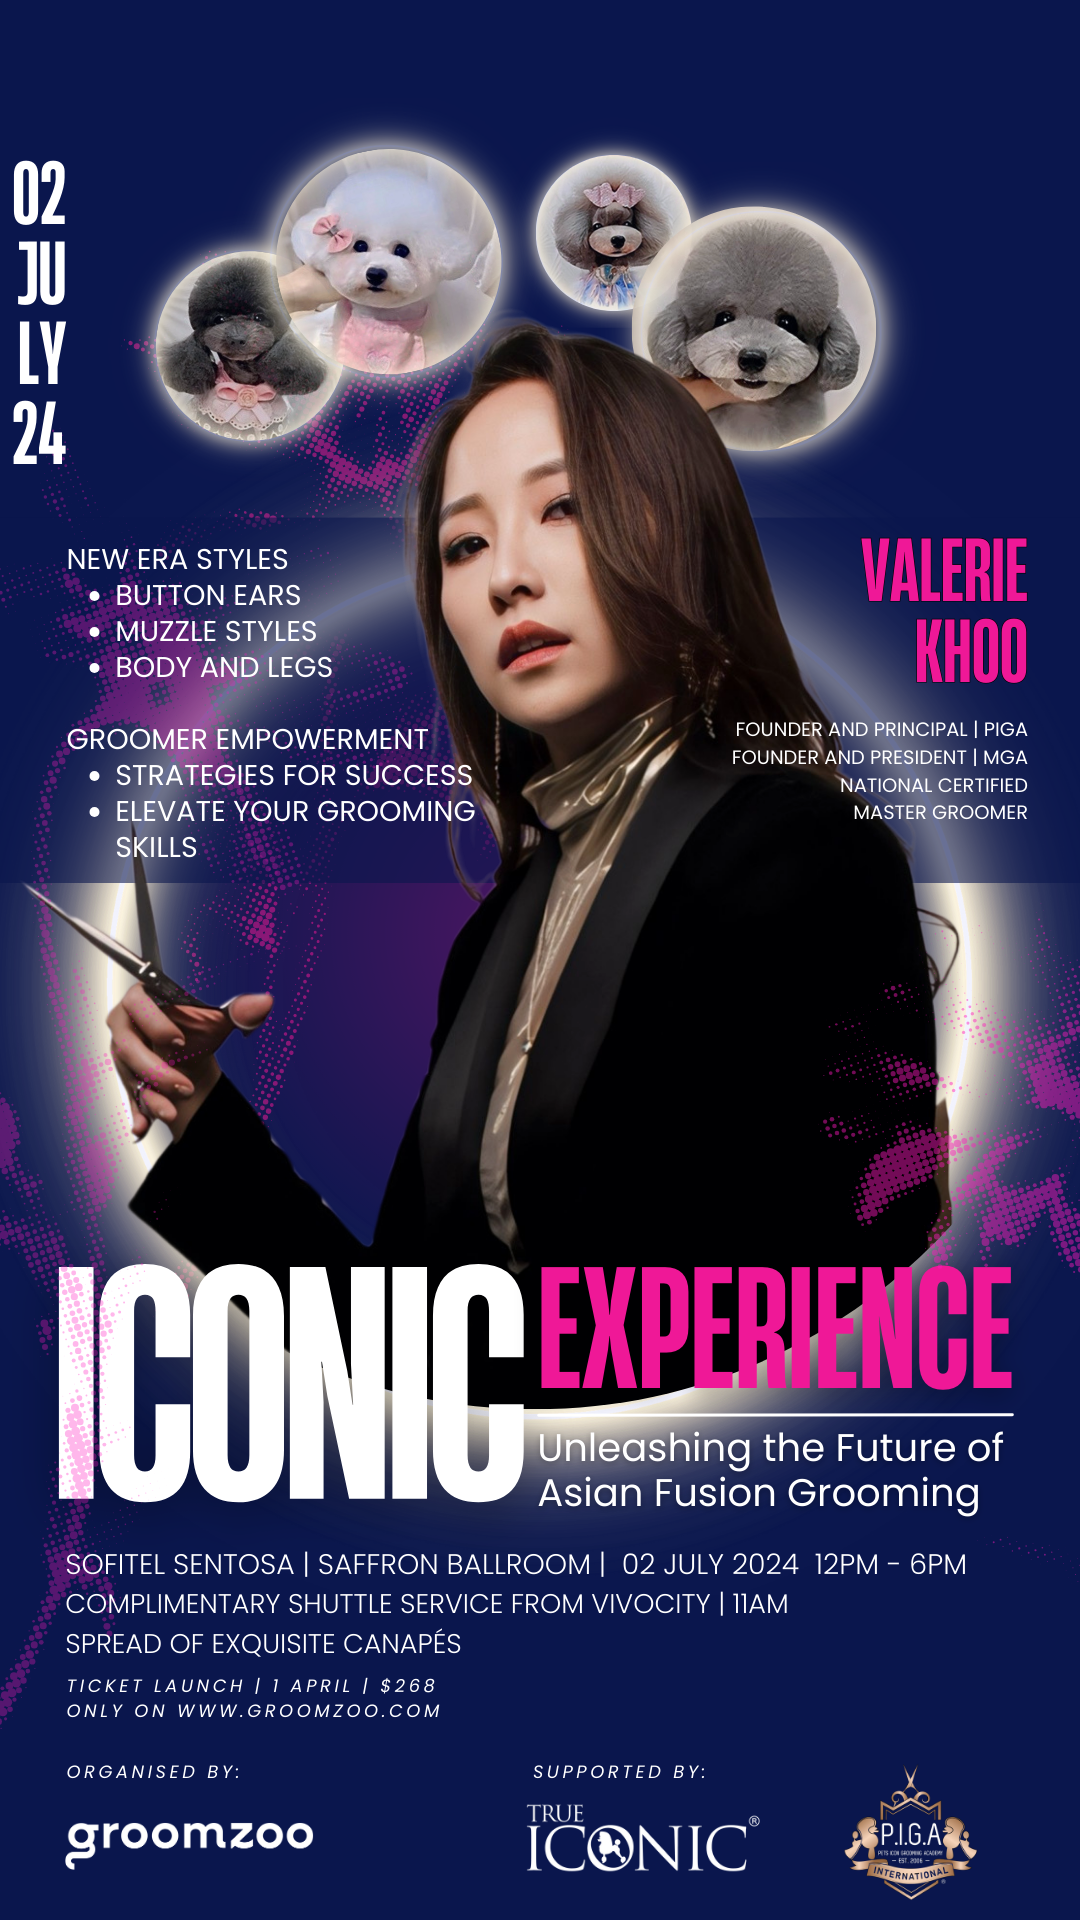 Event Ticket | Iconic Experience with Valerie Khoo